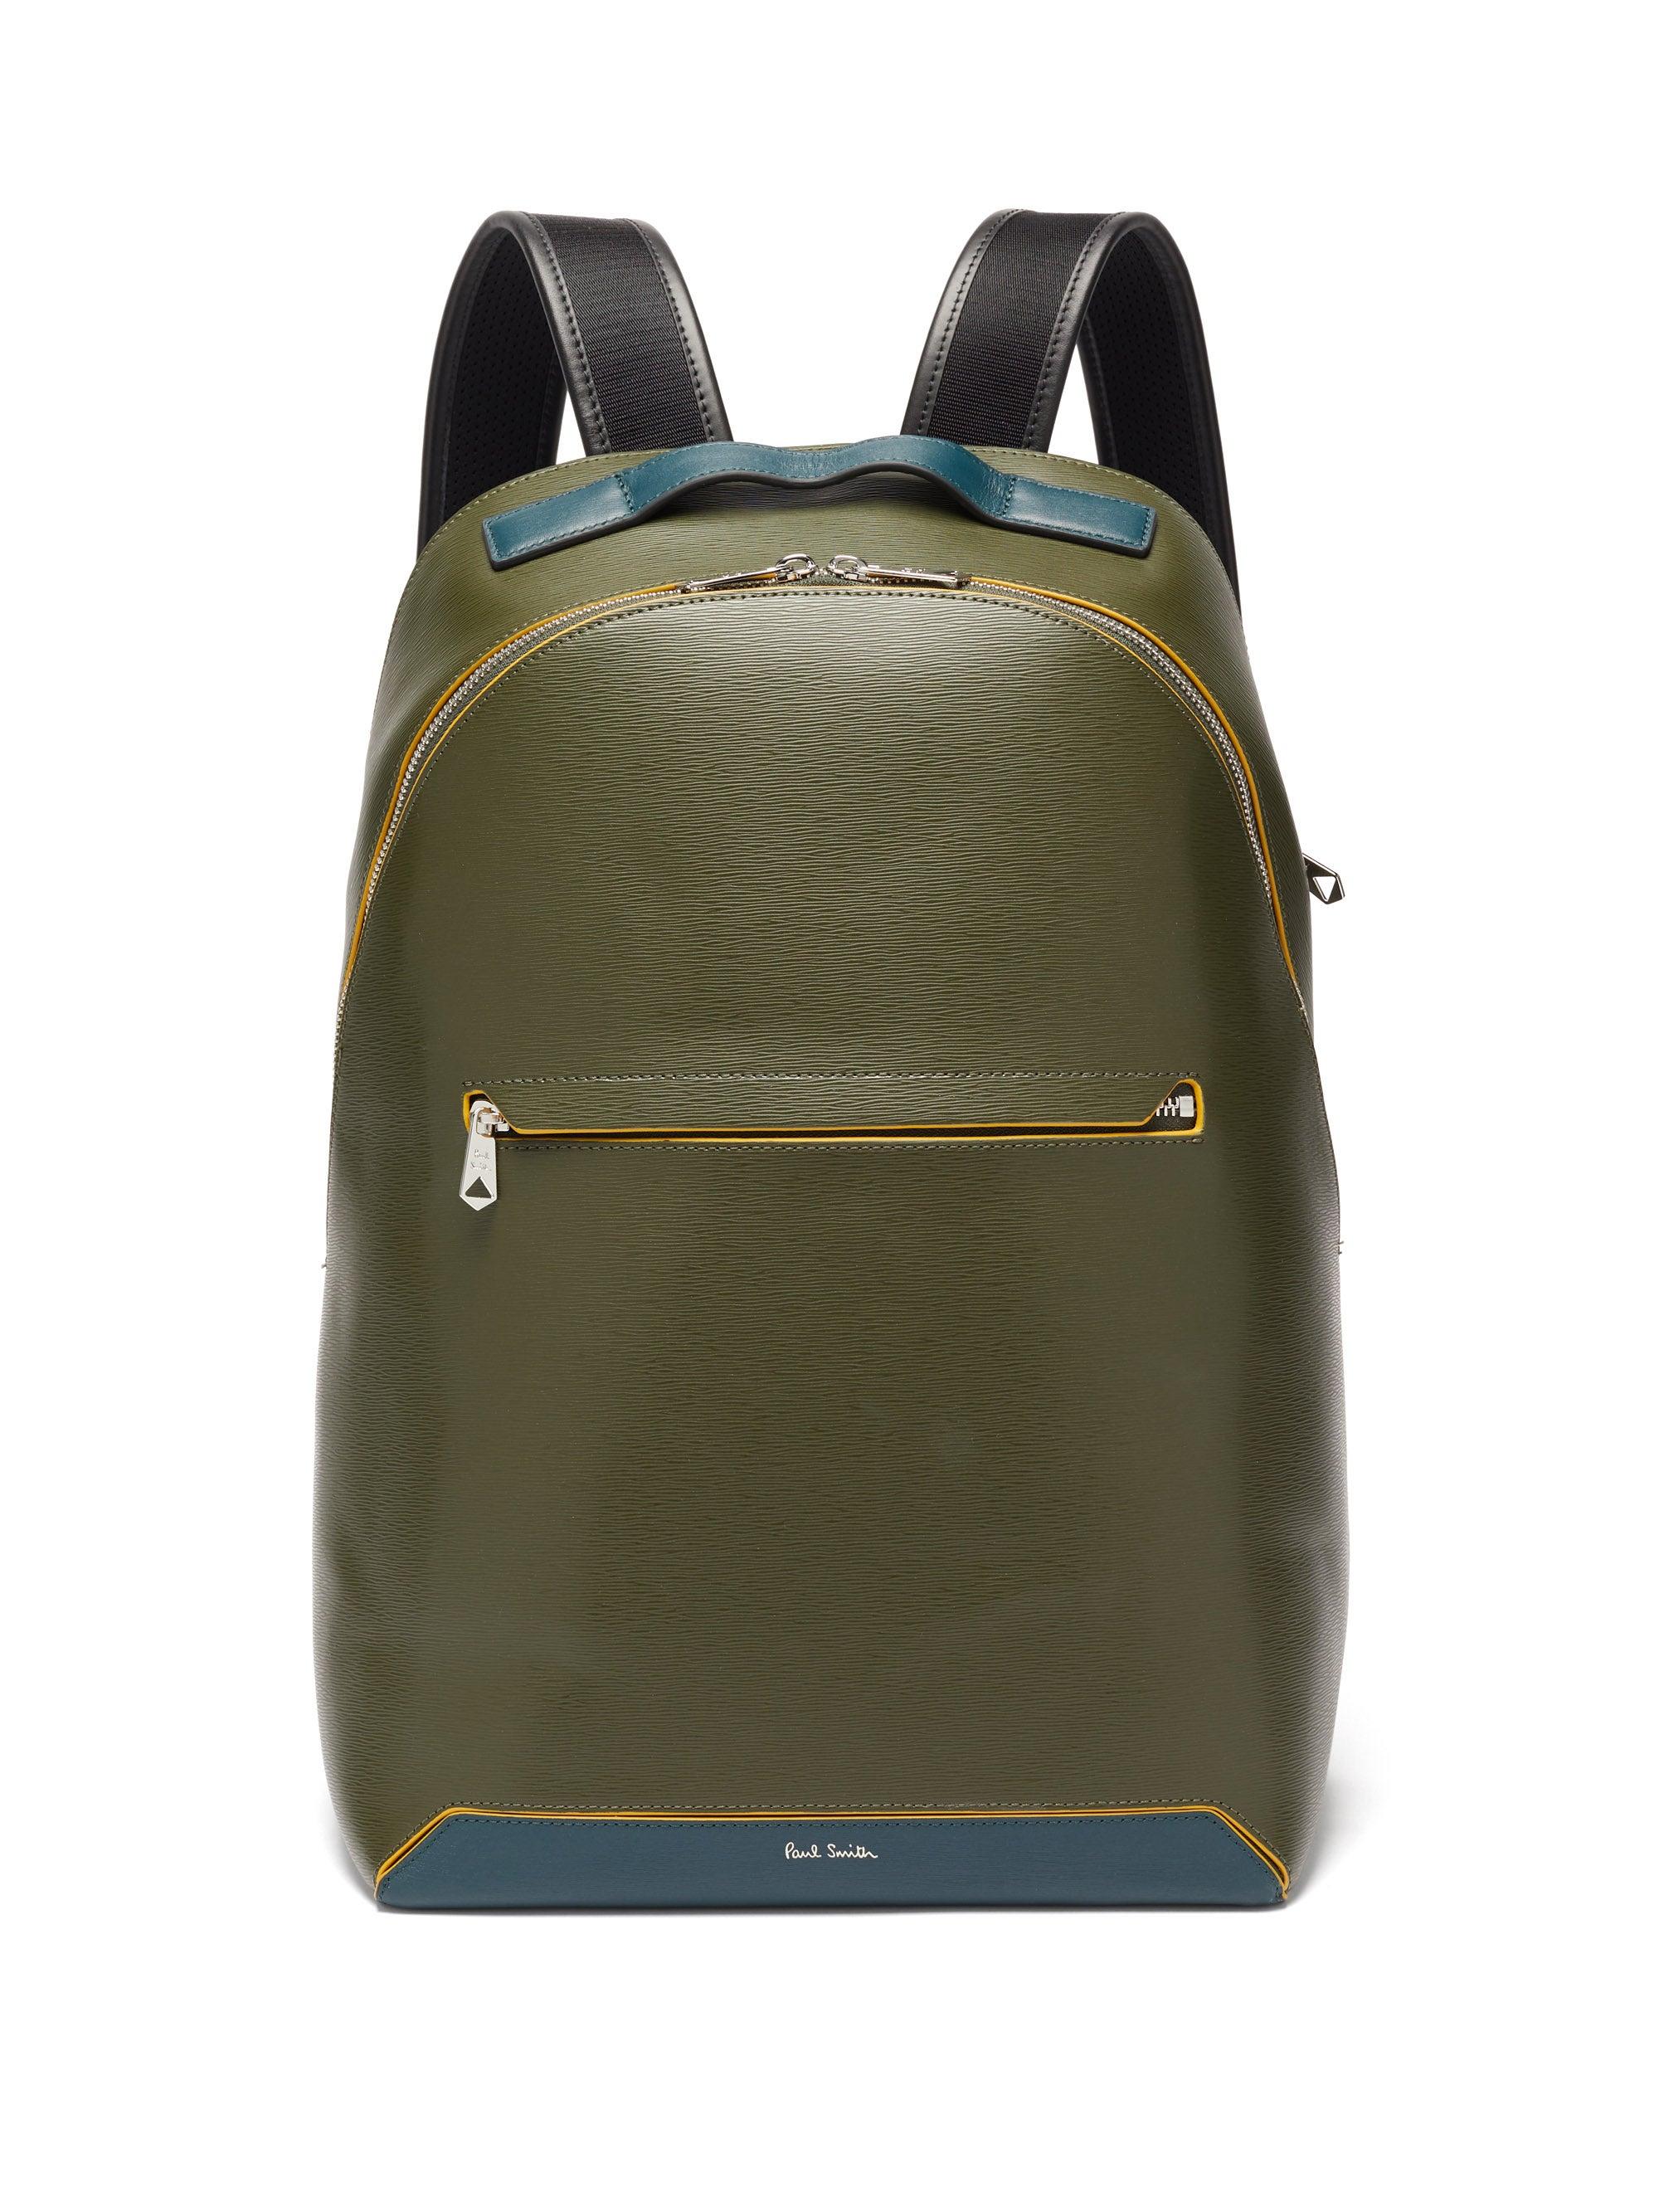 Paul Smith Embossed-leather Backpack in Khaki (Green) for Men - Lyst